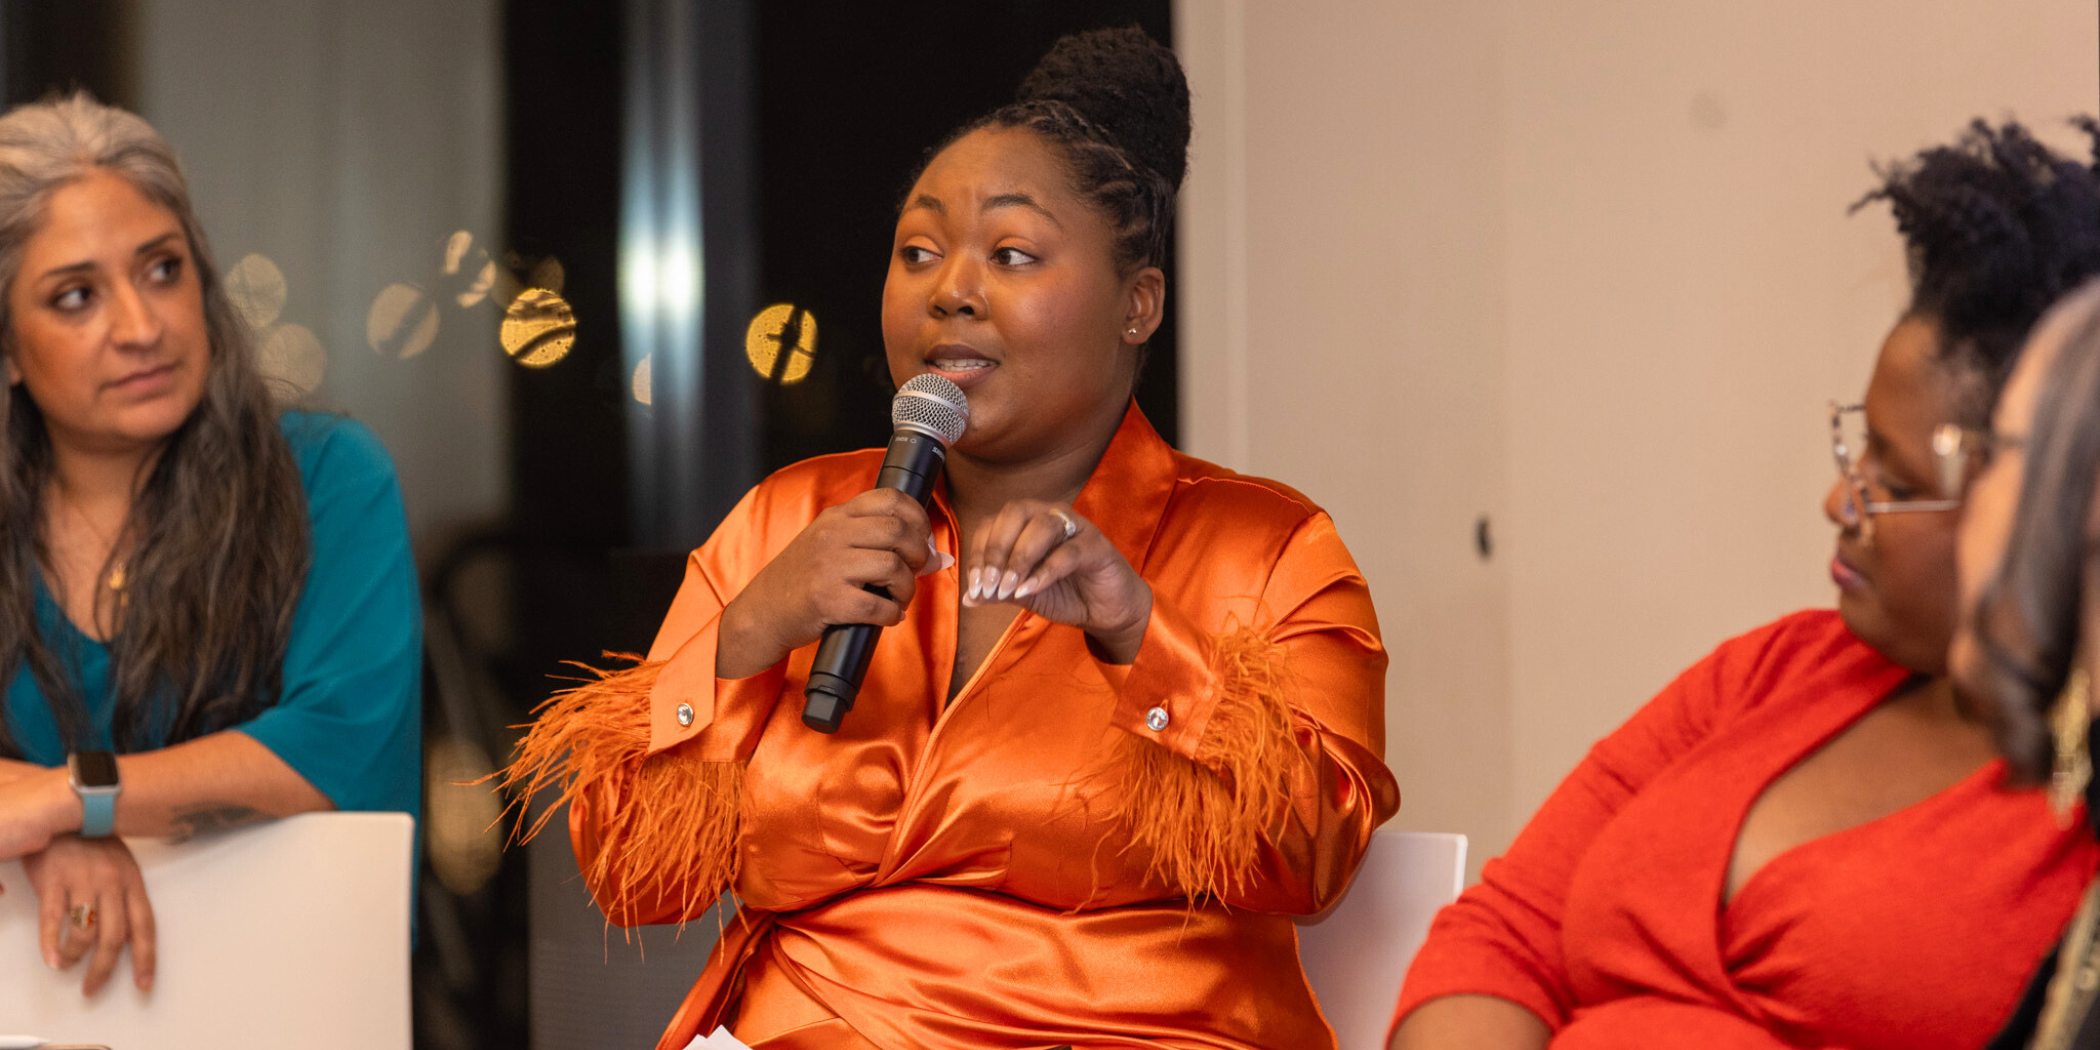 Black female student wearing orange and leading a panel discussion